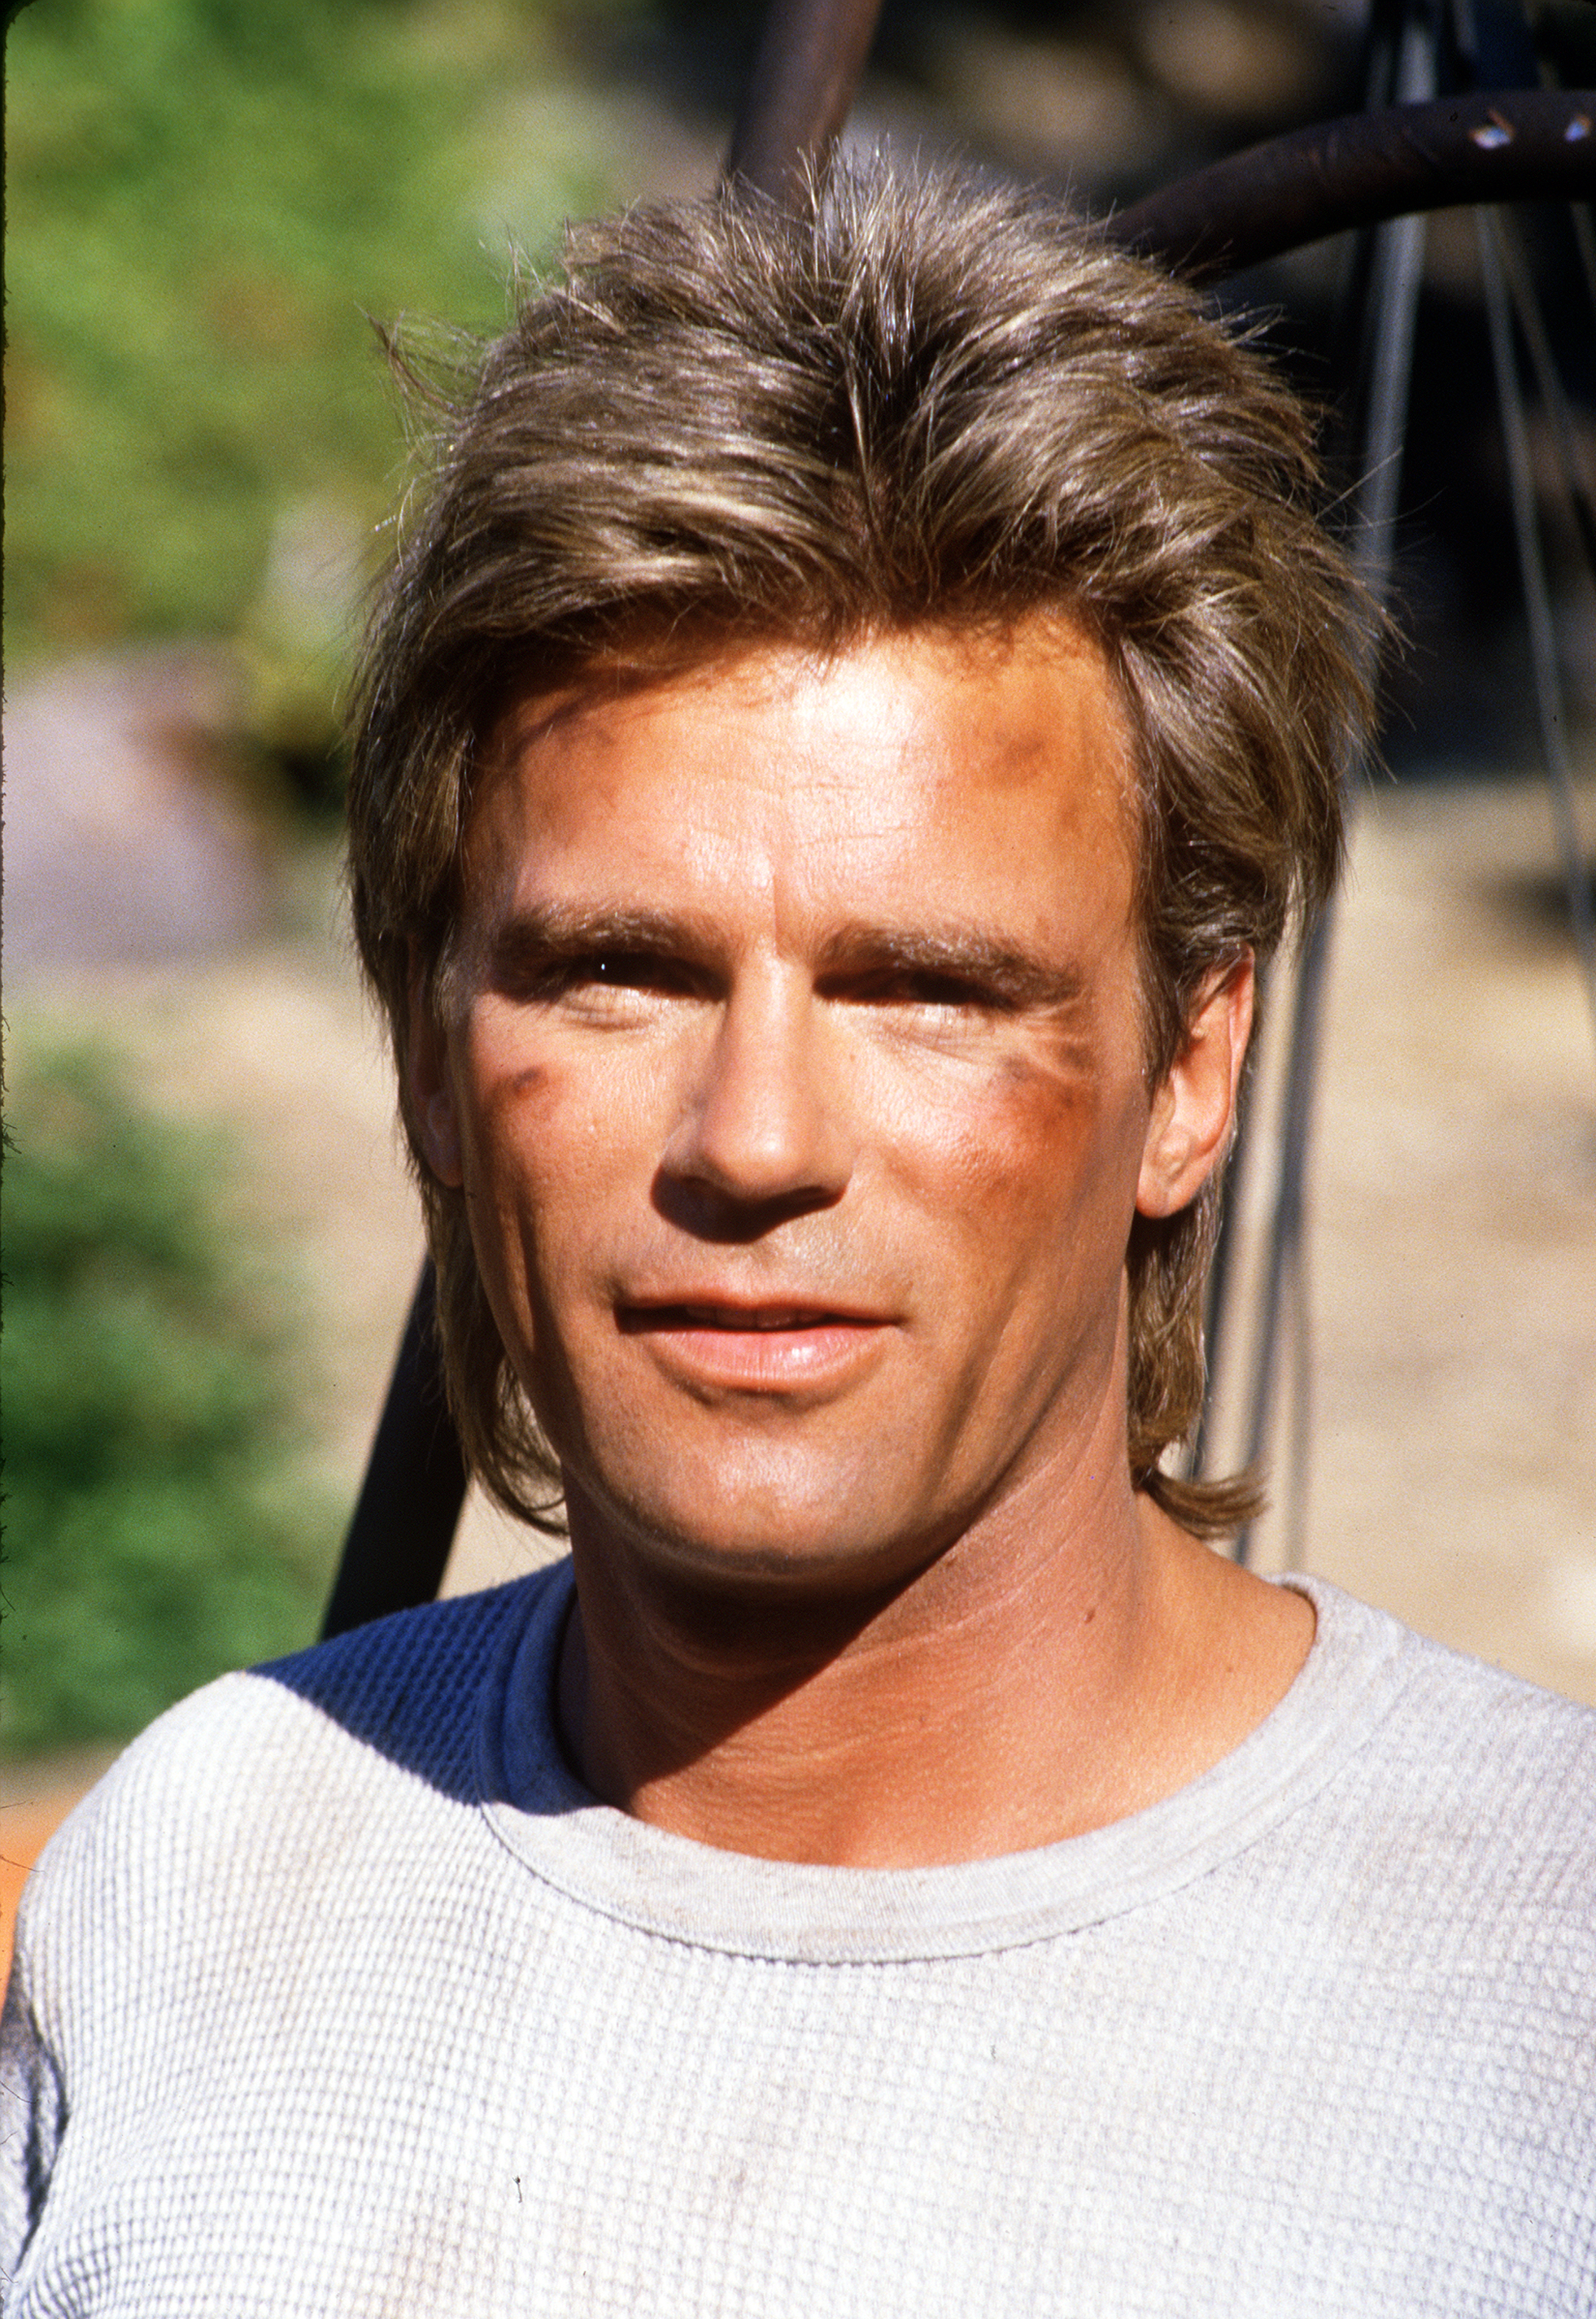 Richard Dean Anderson as Angus MacGyver on season 3 of "MacGyver" on November 2, 1987 | Source: Getty Images